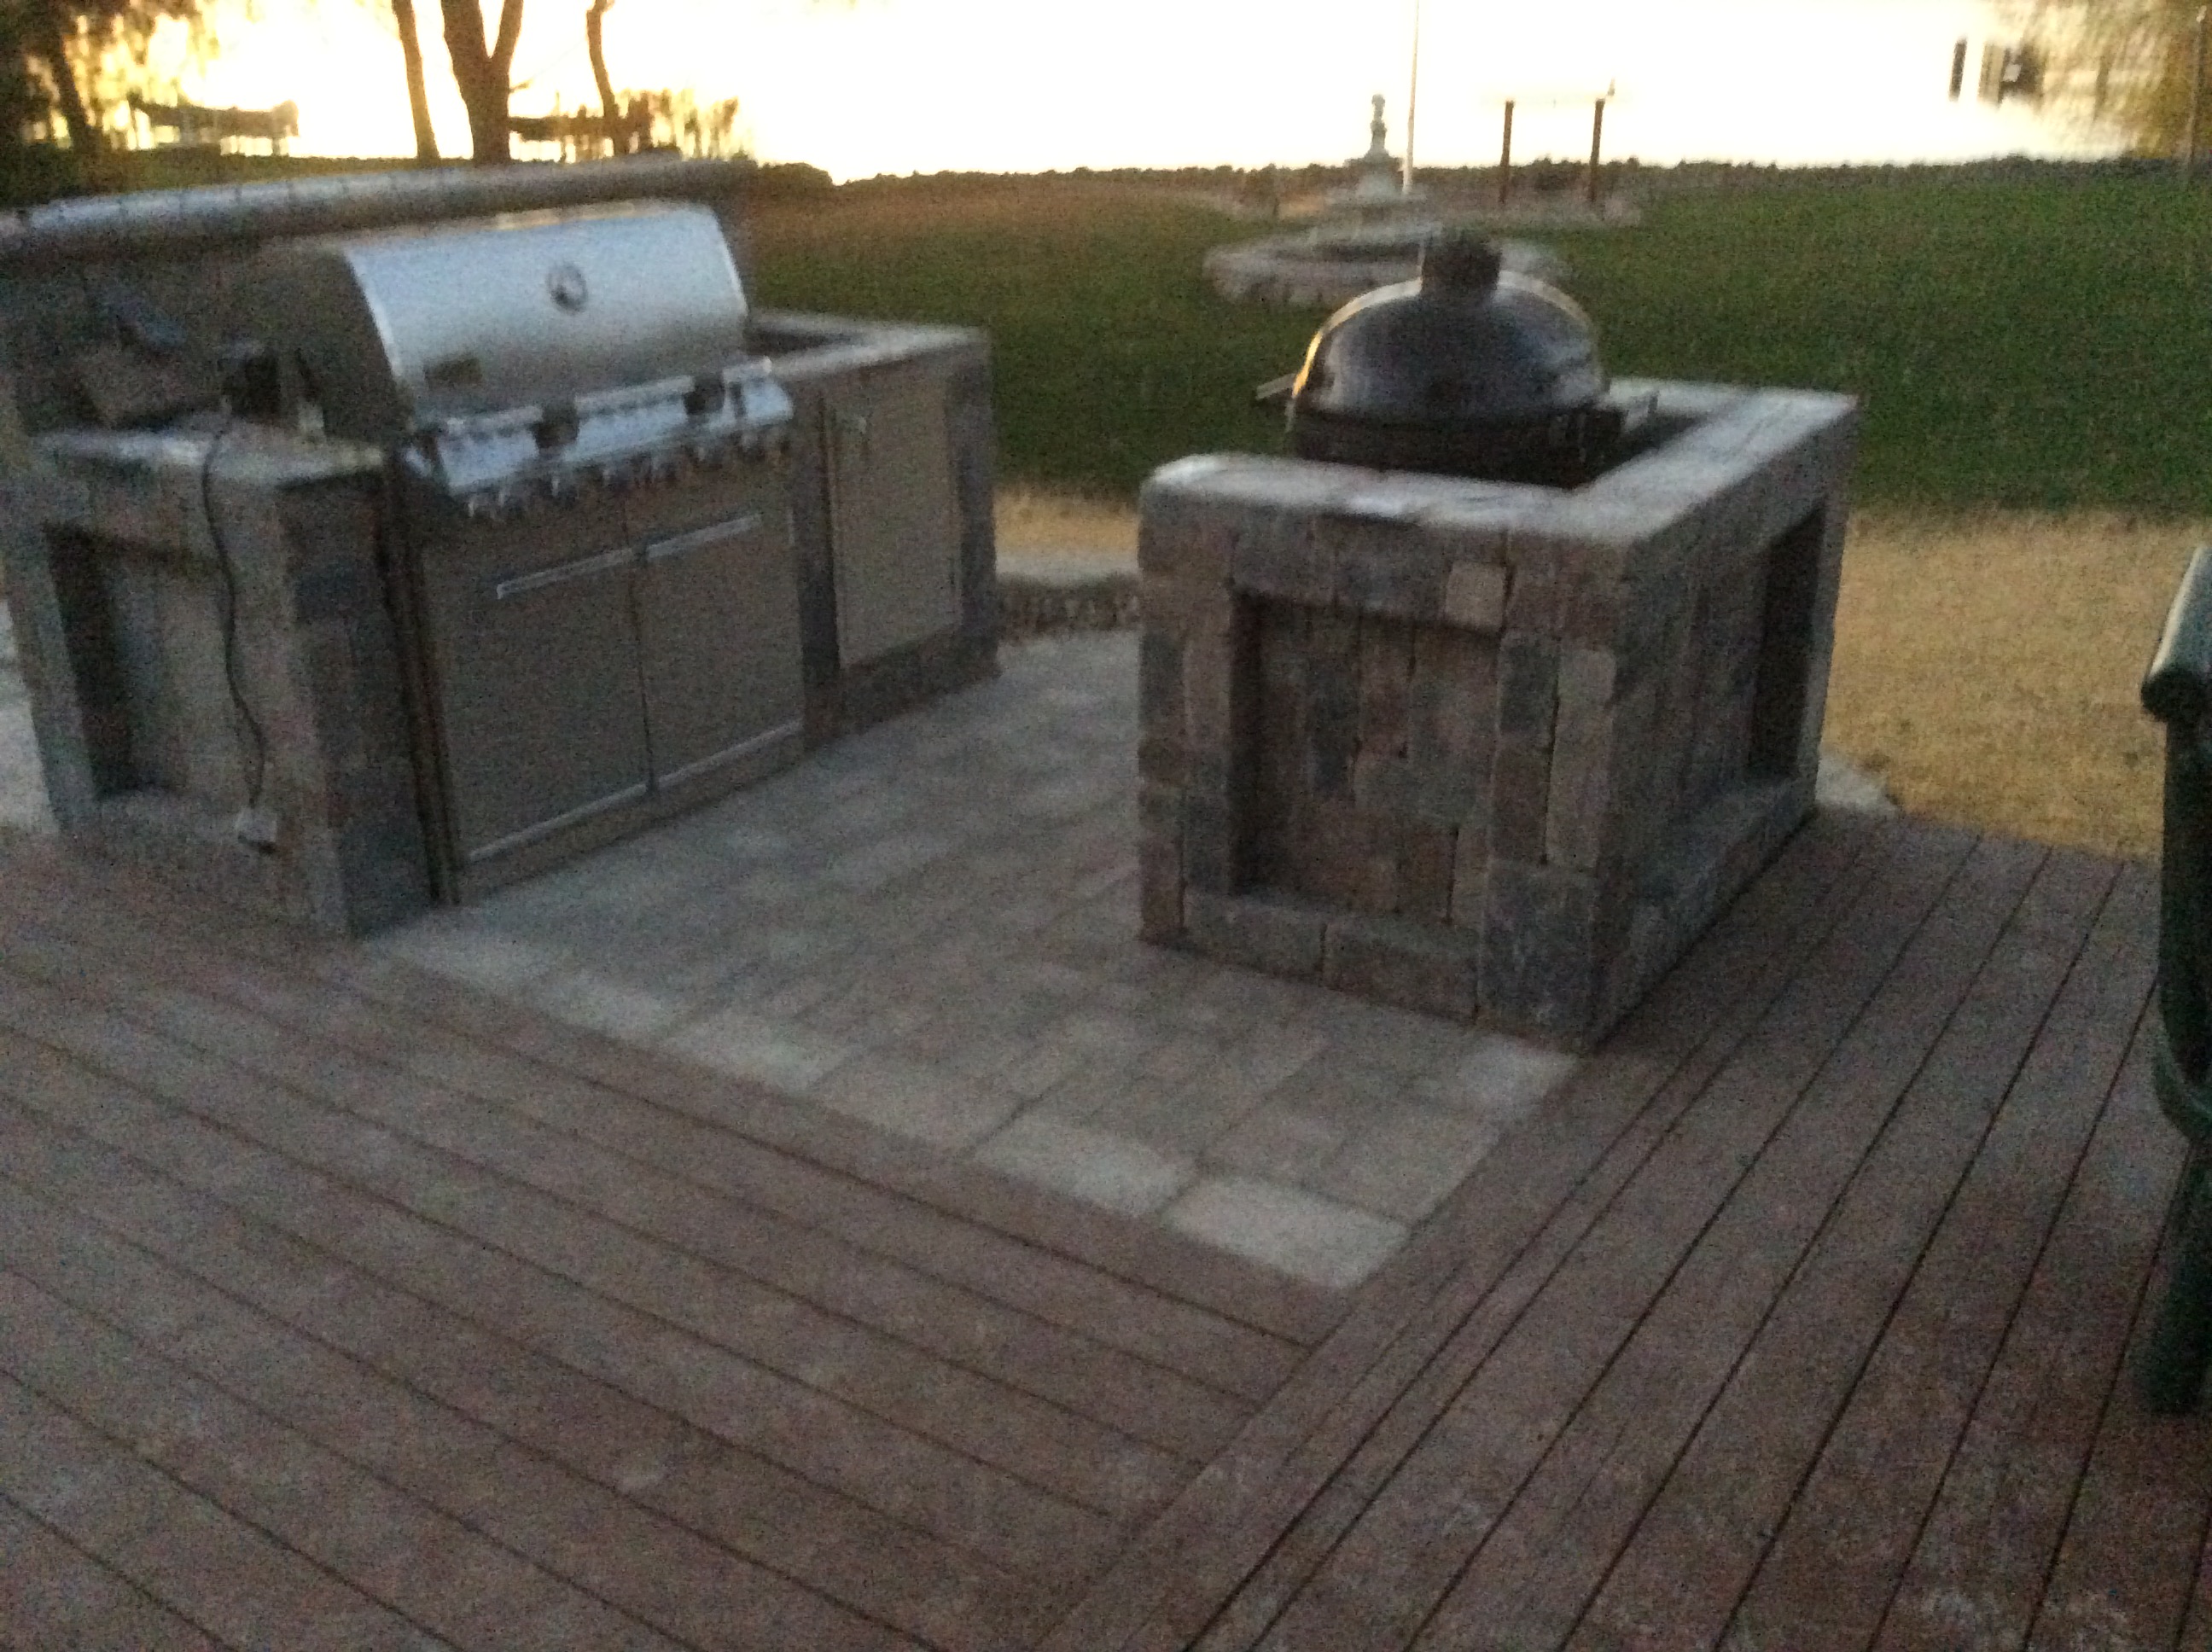 grill and smoker in outdoor kitchen patio area at sundown 